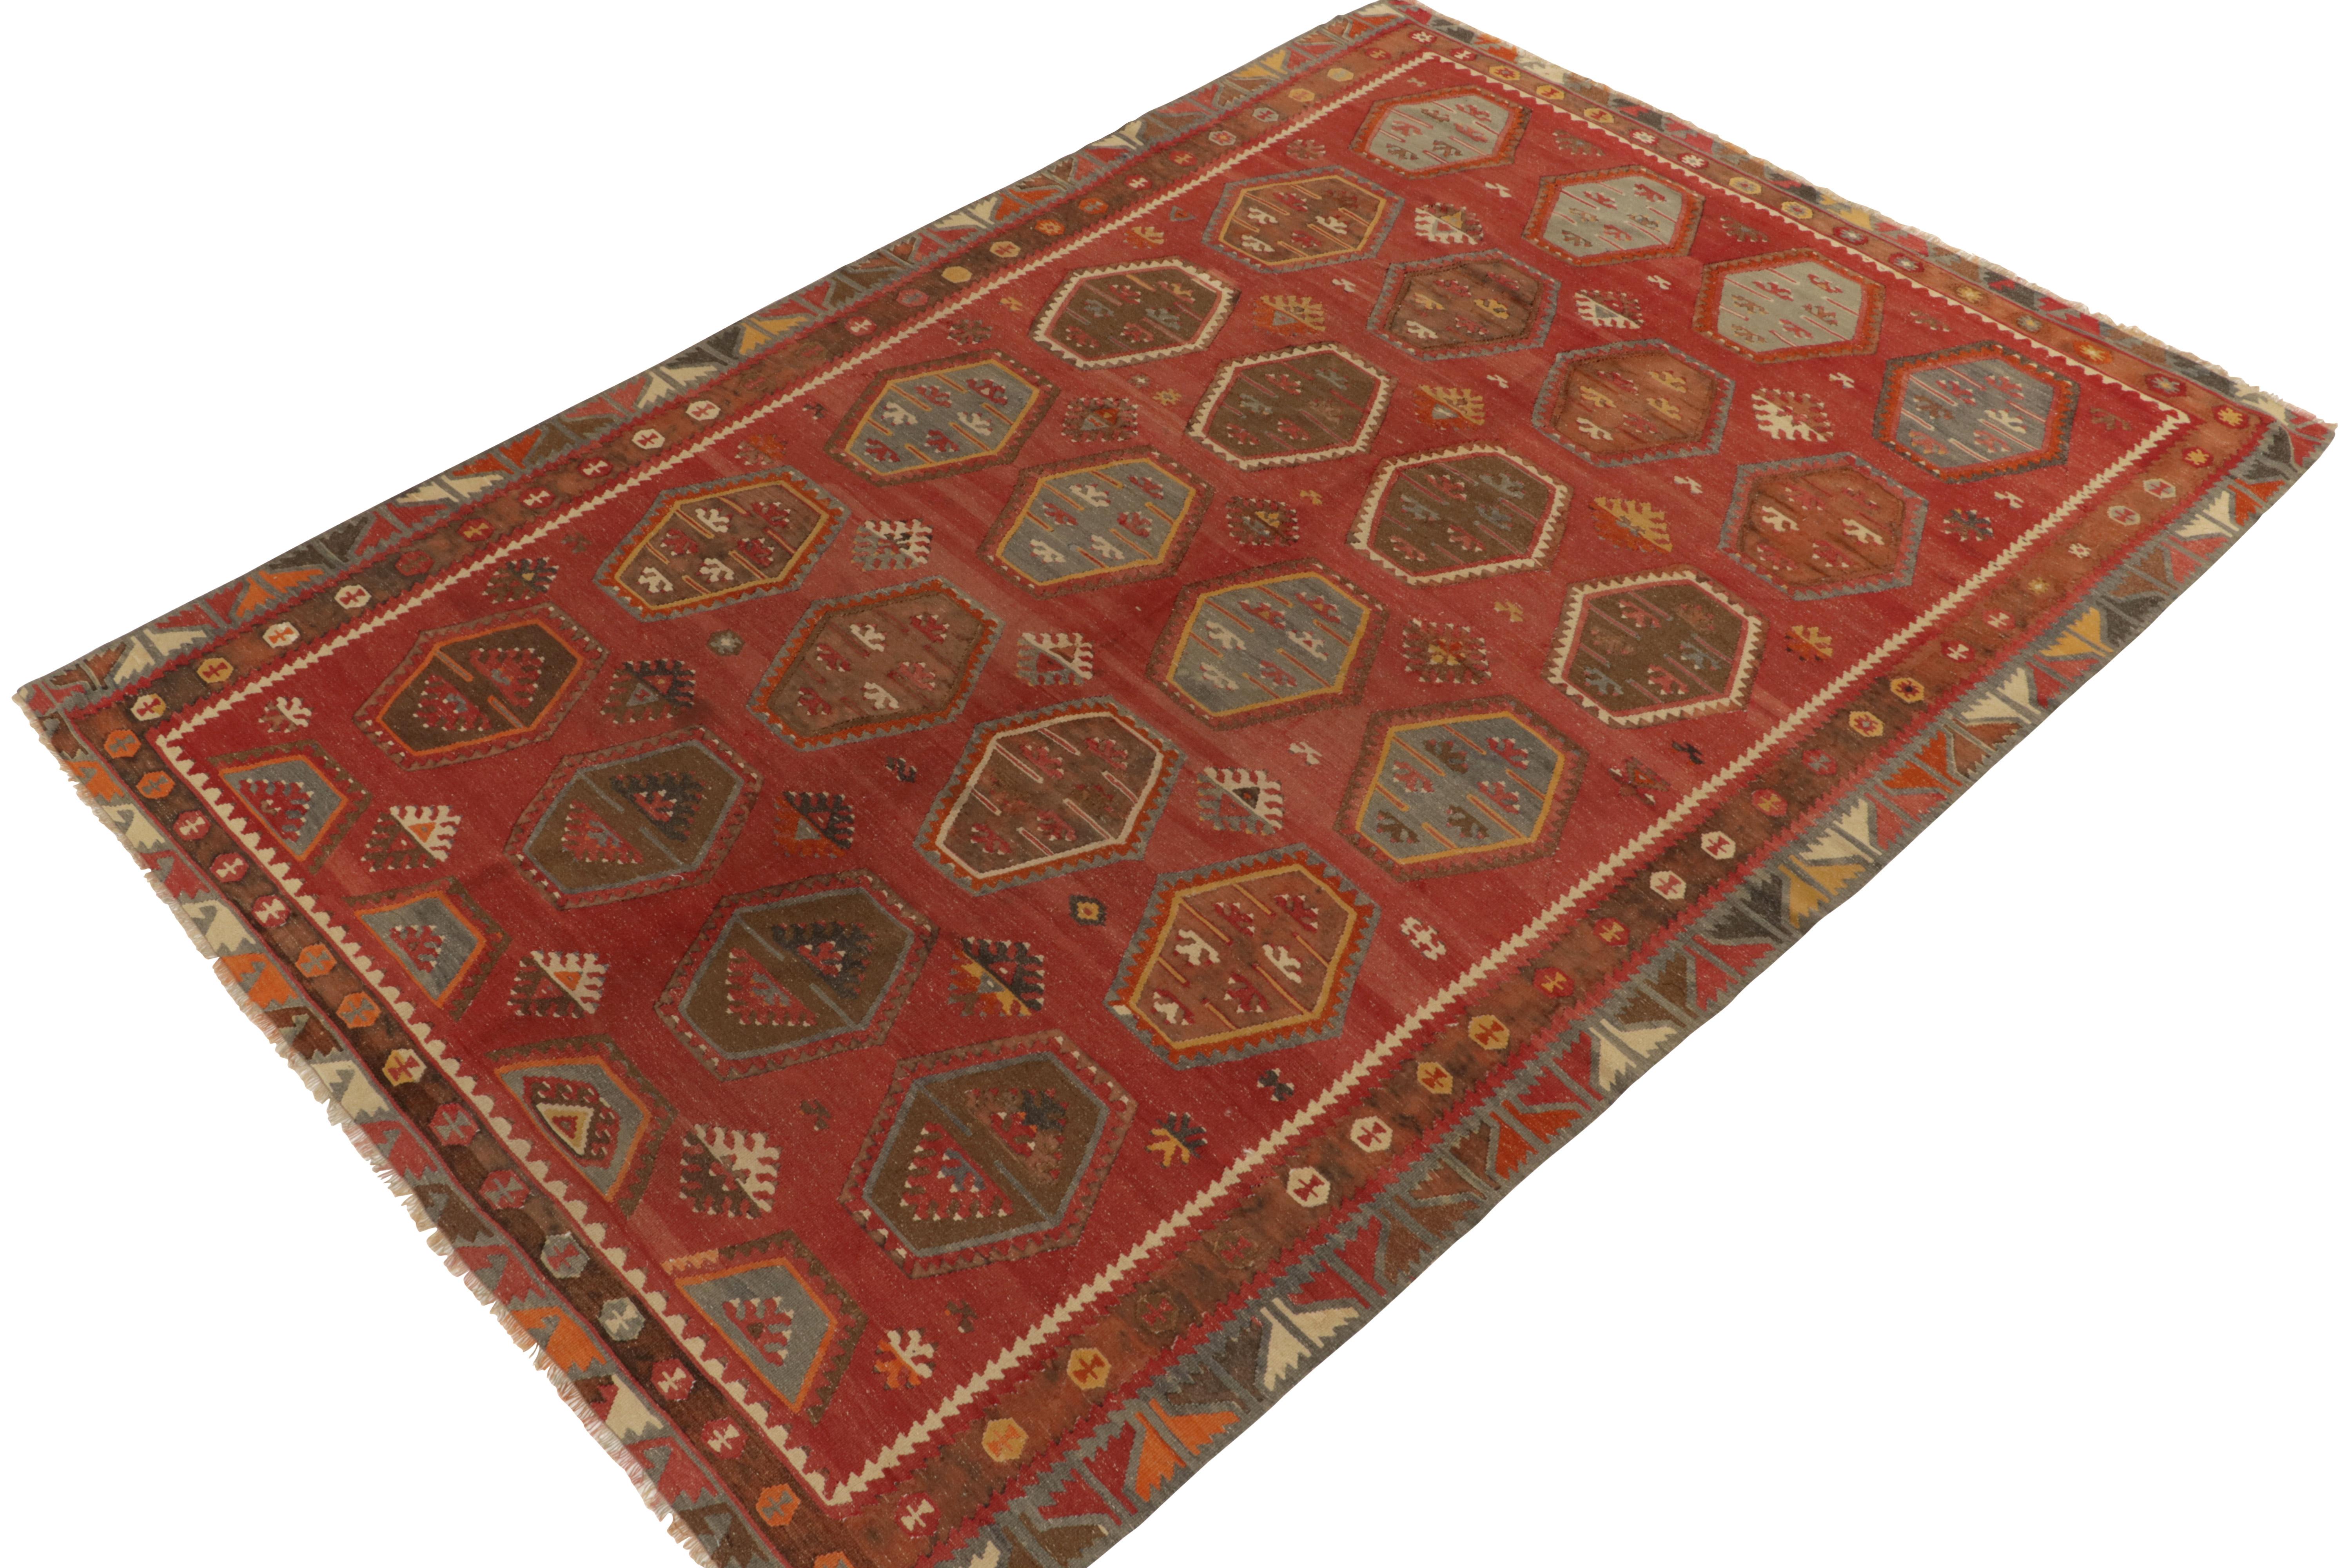 Originating between 1950-1960, a rare 8x11 vintage kilim rug believed to hail from the Sarkisla lineage of Turkey. 

Handwoven in wool, the tones of red, beige-brown and blue play harmoniously together for a rustic tribal appeal in the field’s